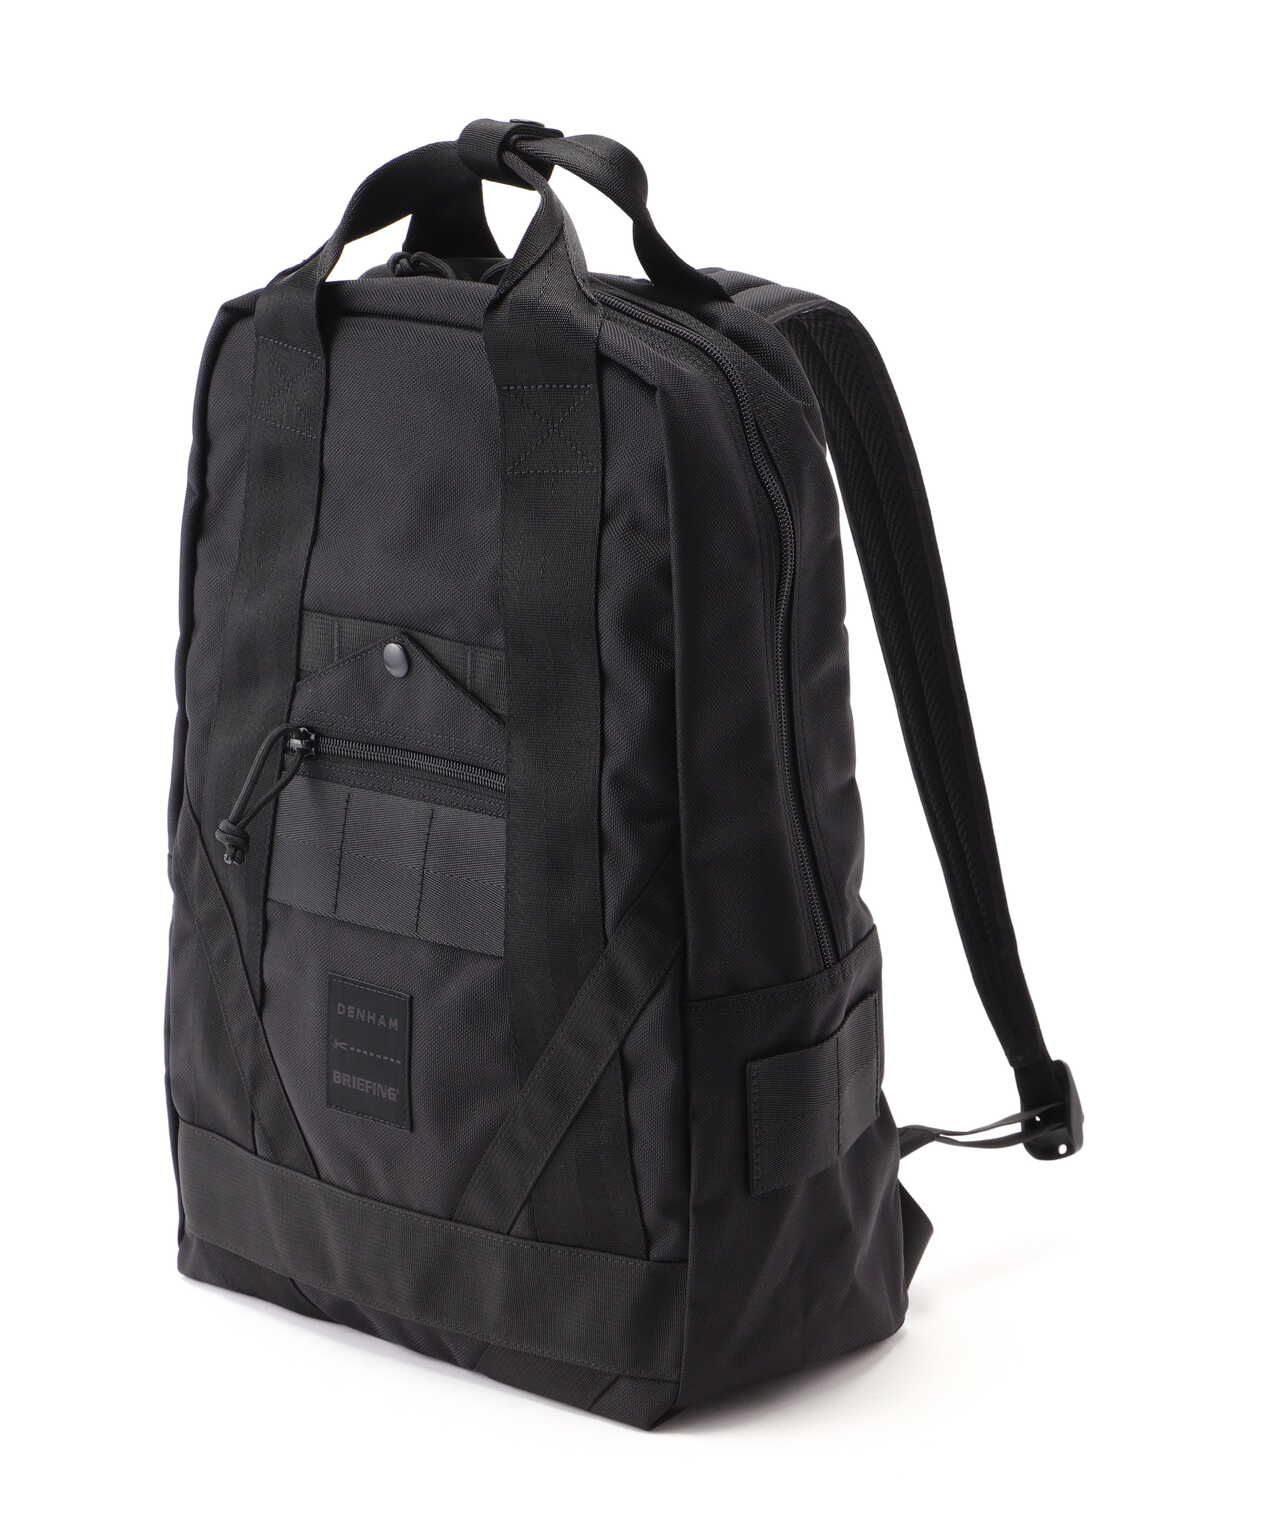 DENHAM×BRIEFING/デンハム×ブリーフィング/7POINT BACKPACK AIR 